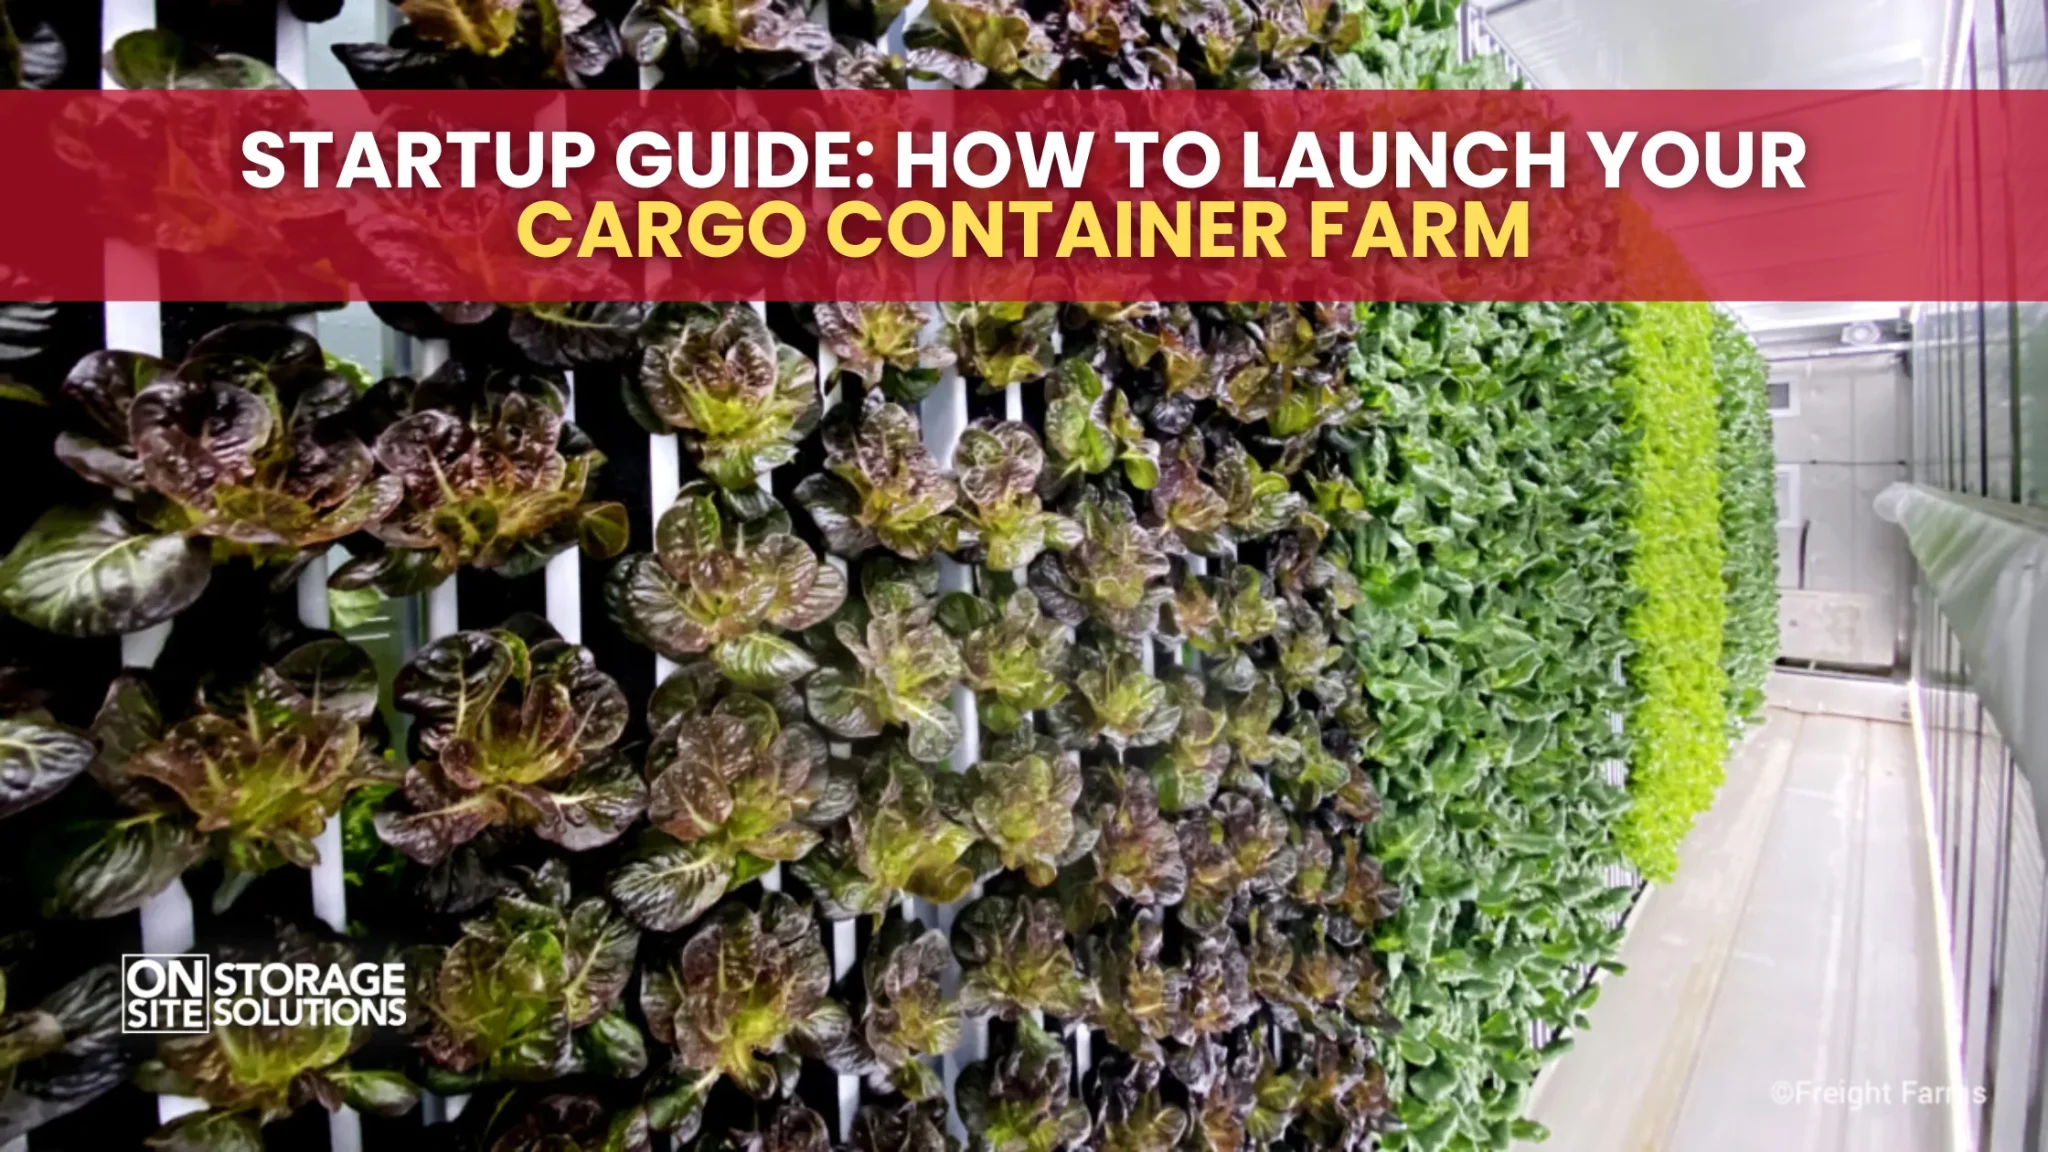 Startup Guide: How To Launch Your Cargo Container Farm